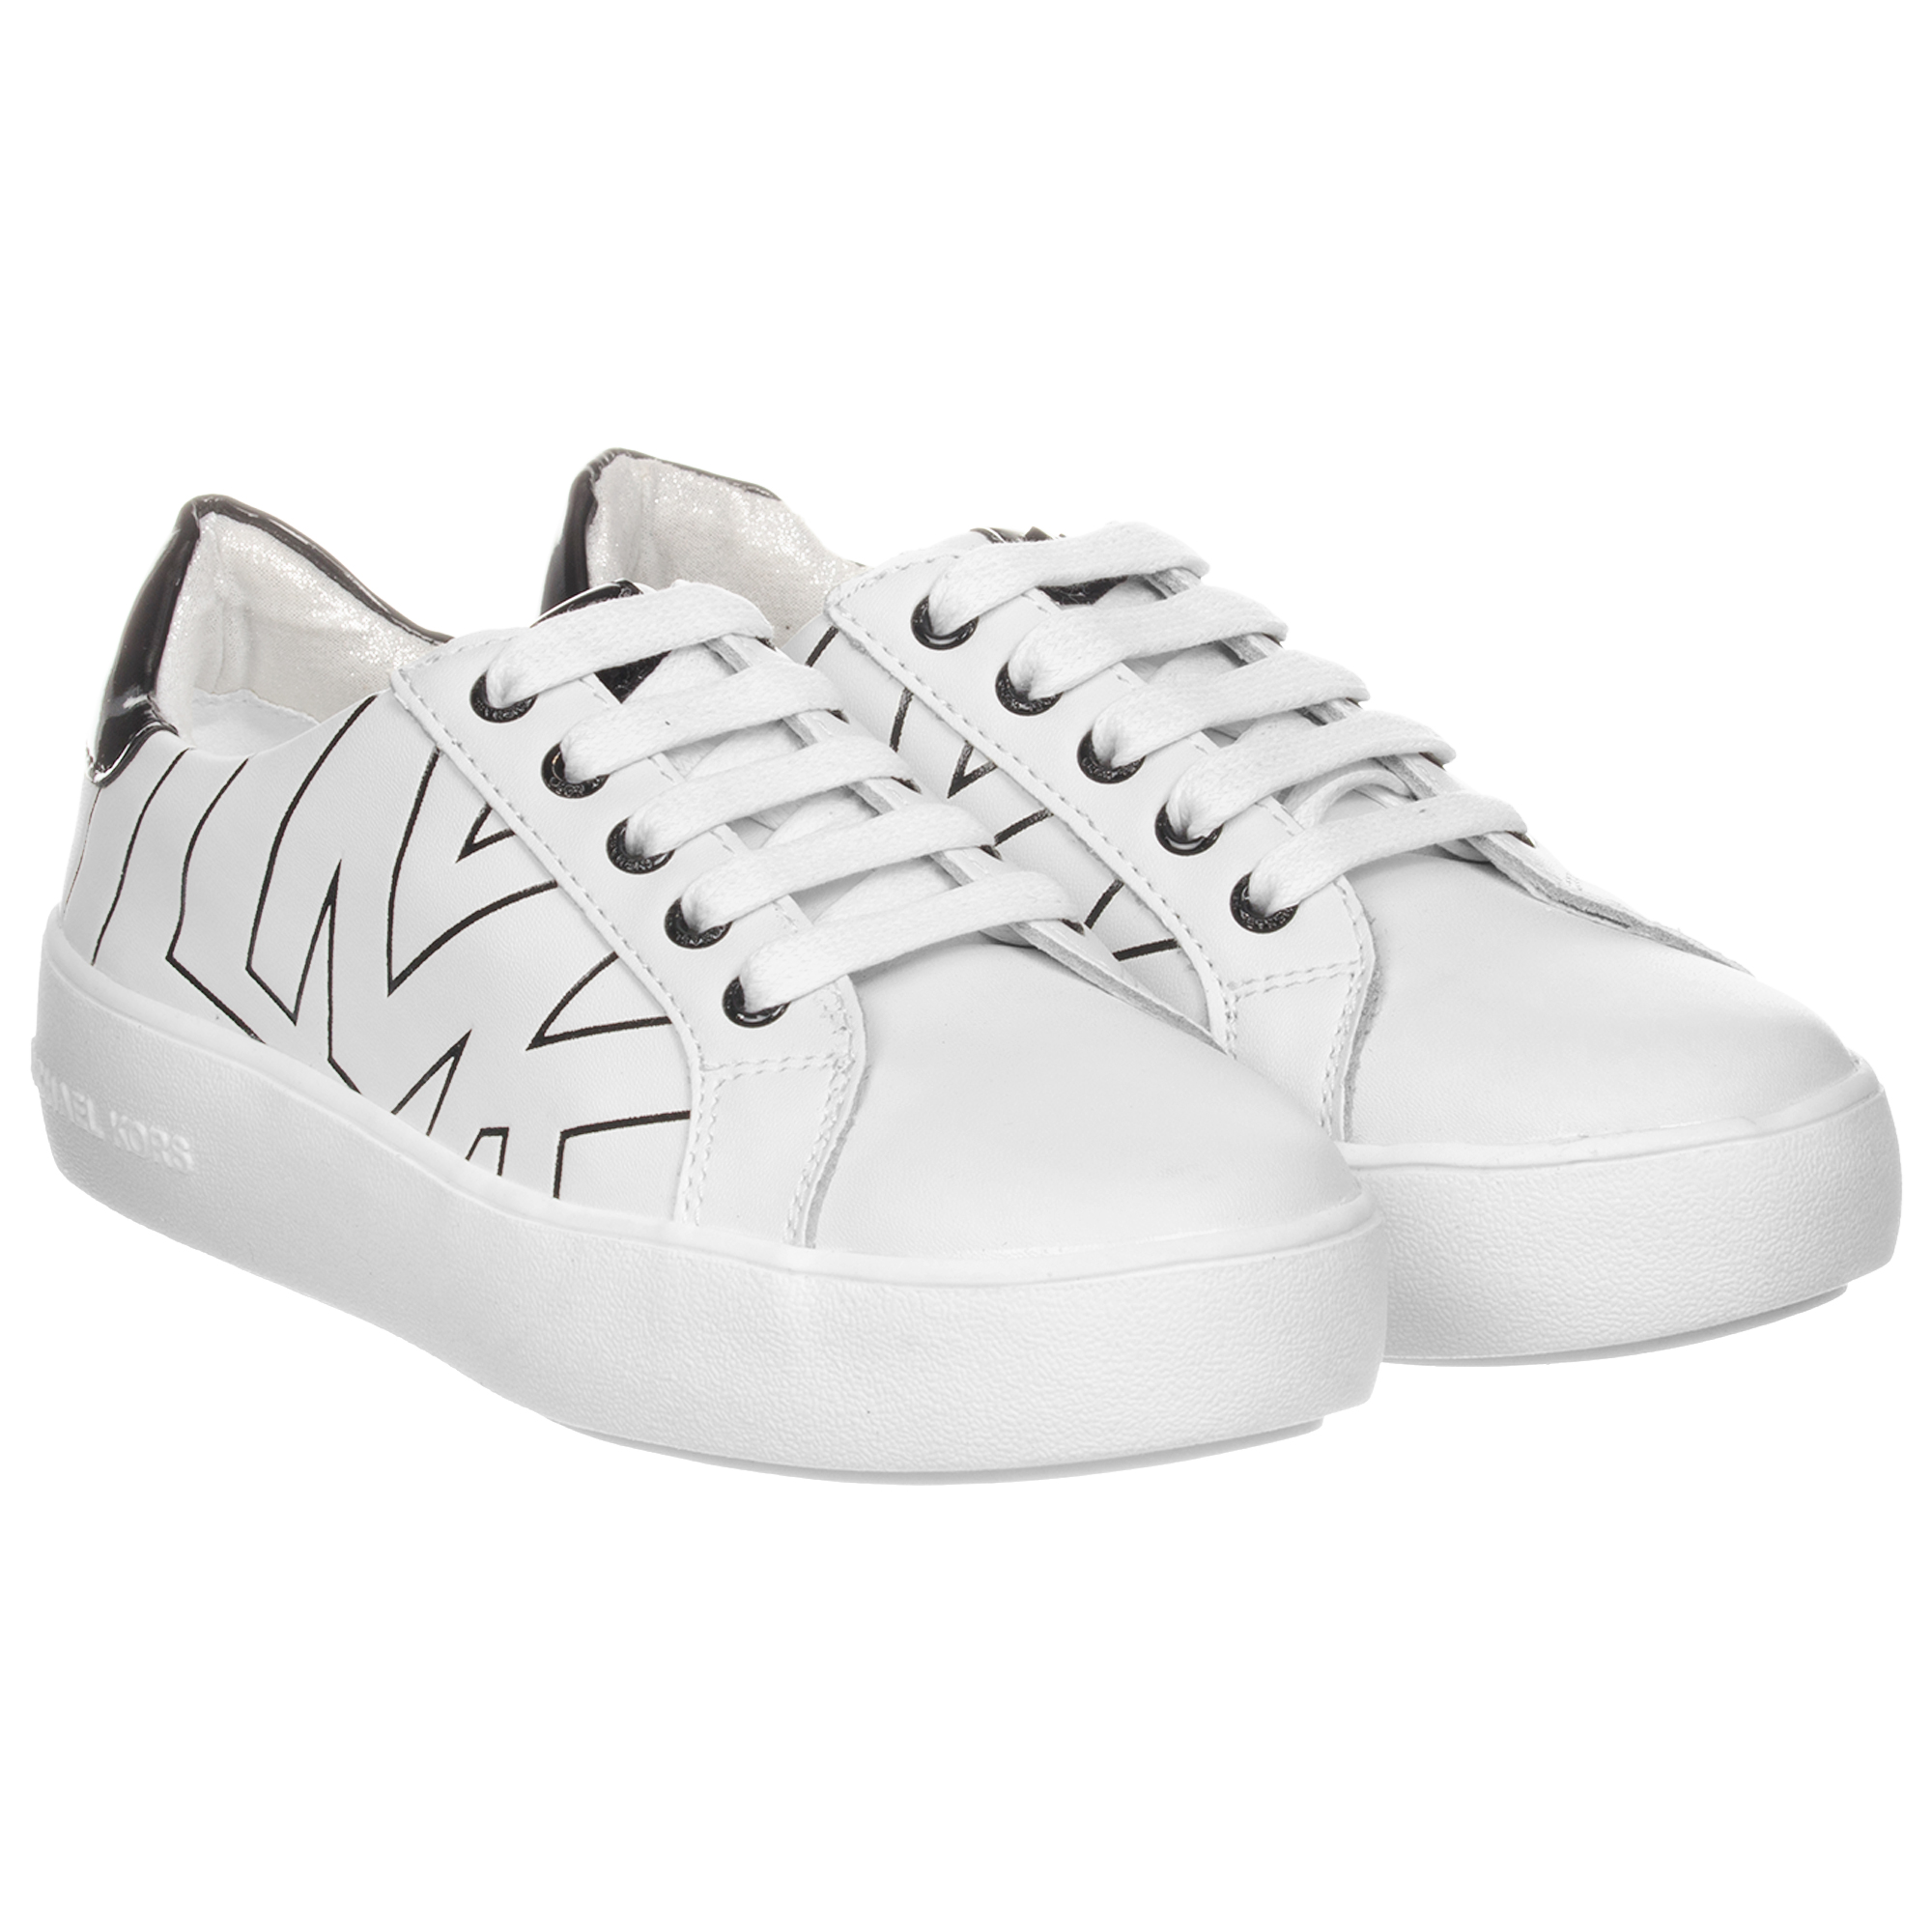 MICHAEL Michael Kors IRVING White  Gold  Free delivery  Spartoo UK    Shoes Low top trainers Women  11140